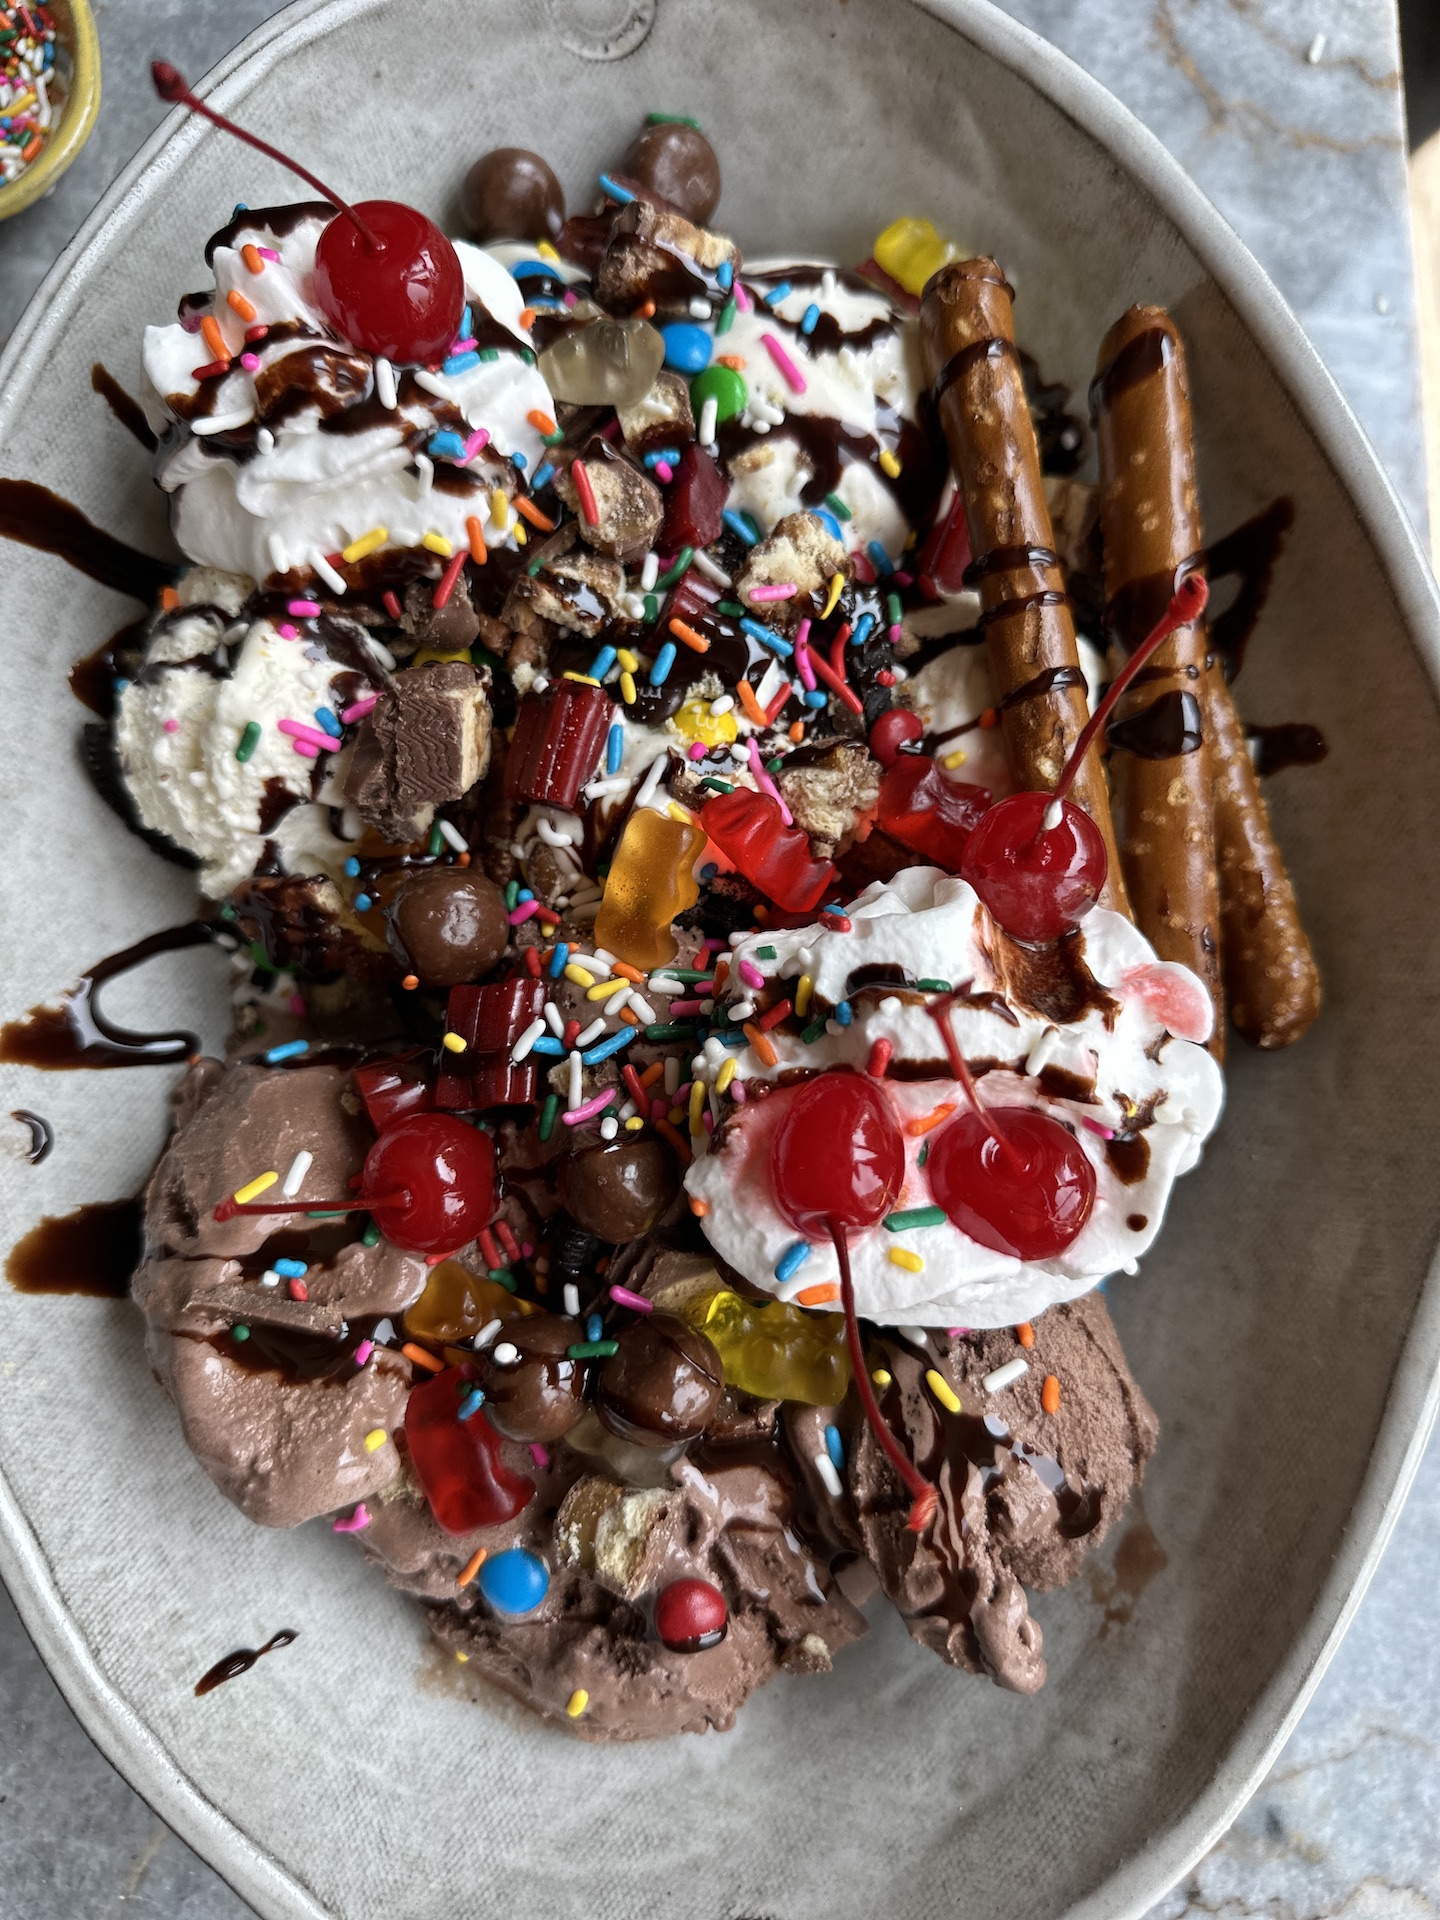 The 5 best ice cream scoops we reviewed in 2023